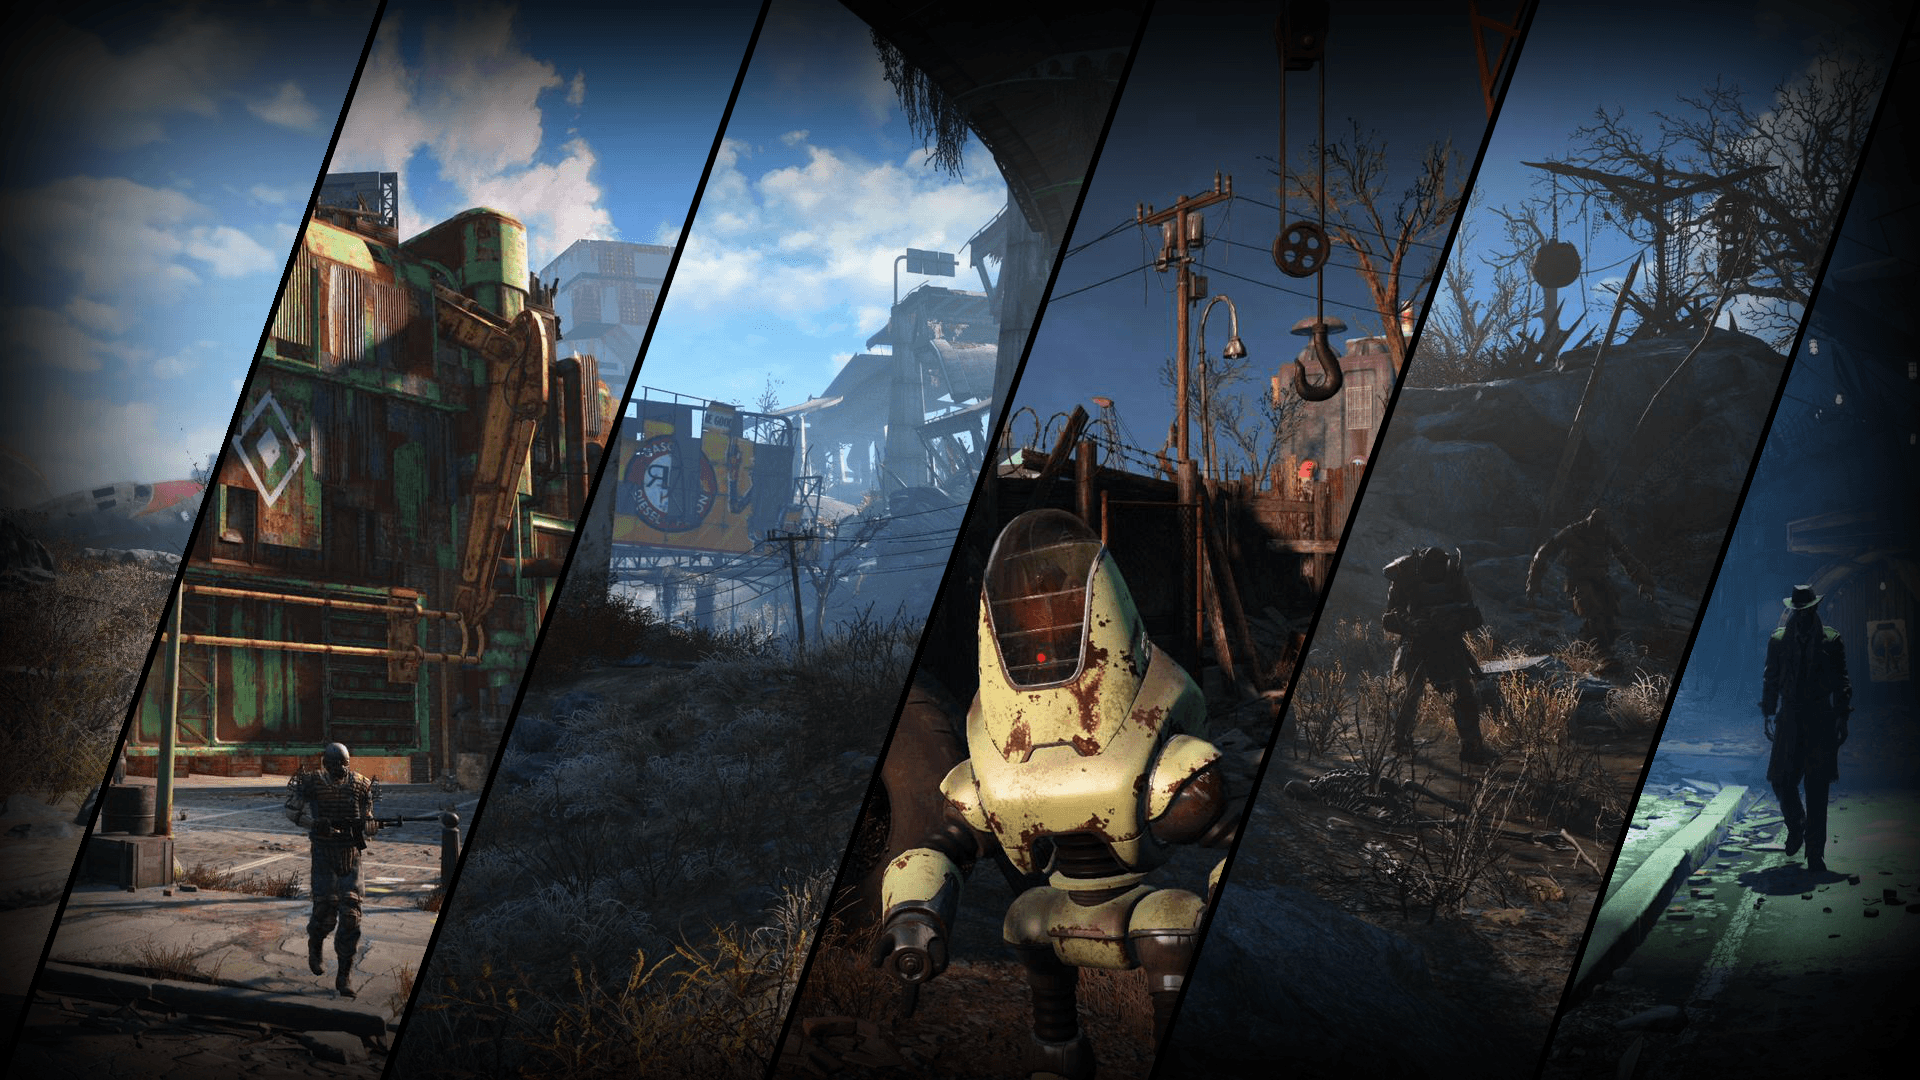 New Fallout 4 Mobile Wallpapers | Fallout 4 wallpapers, Fallout wallpaper,  Gaming wallpapers